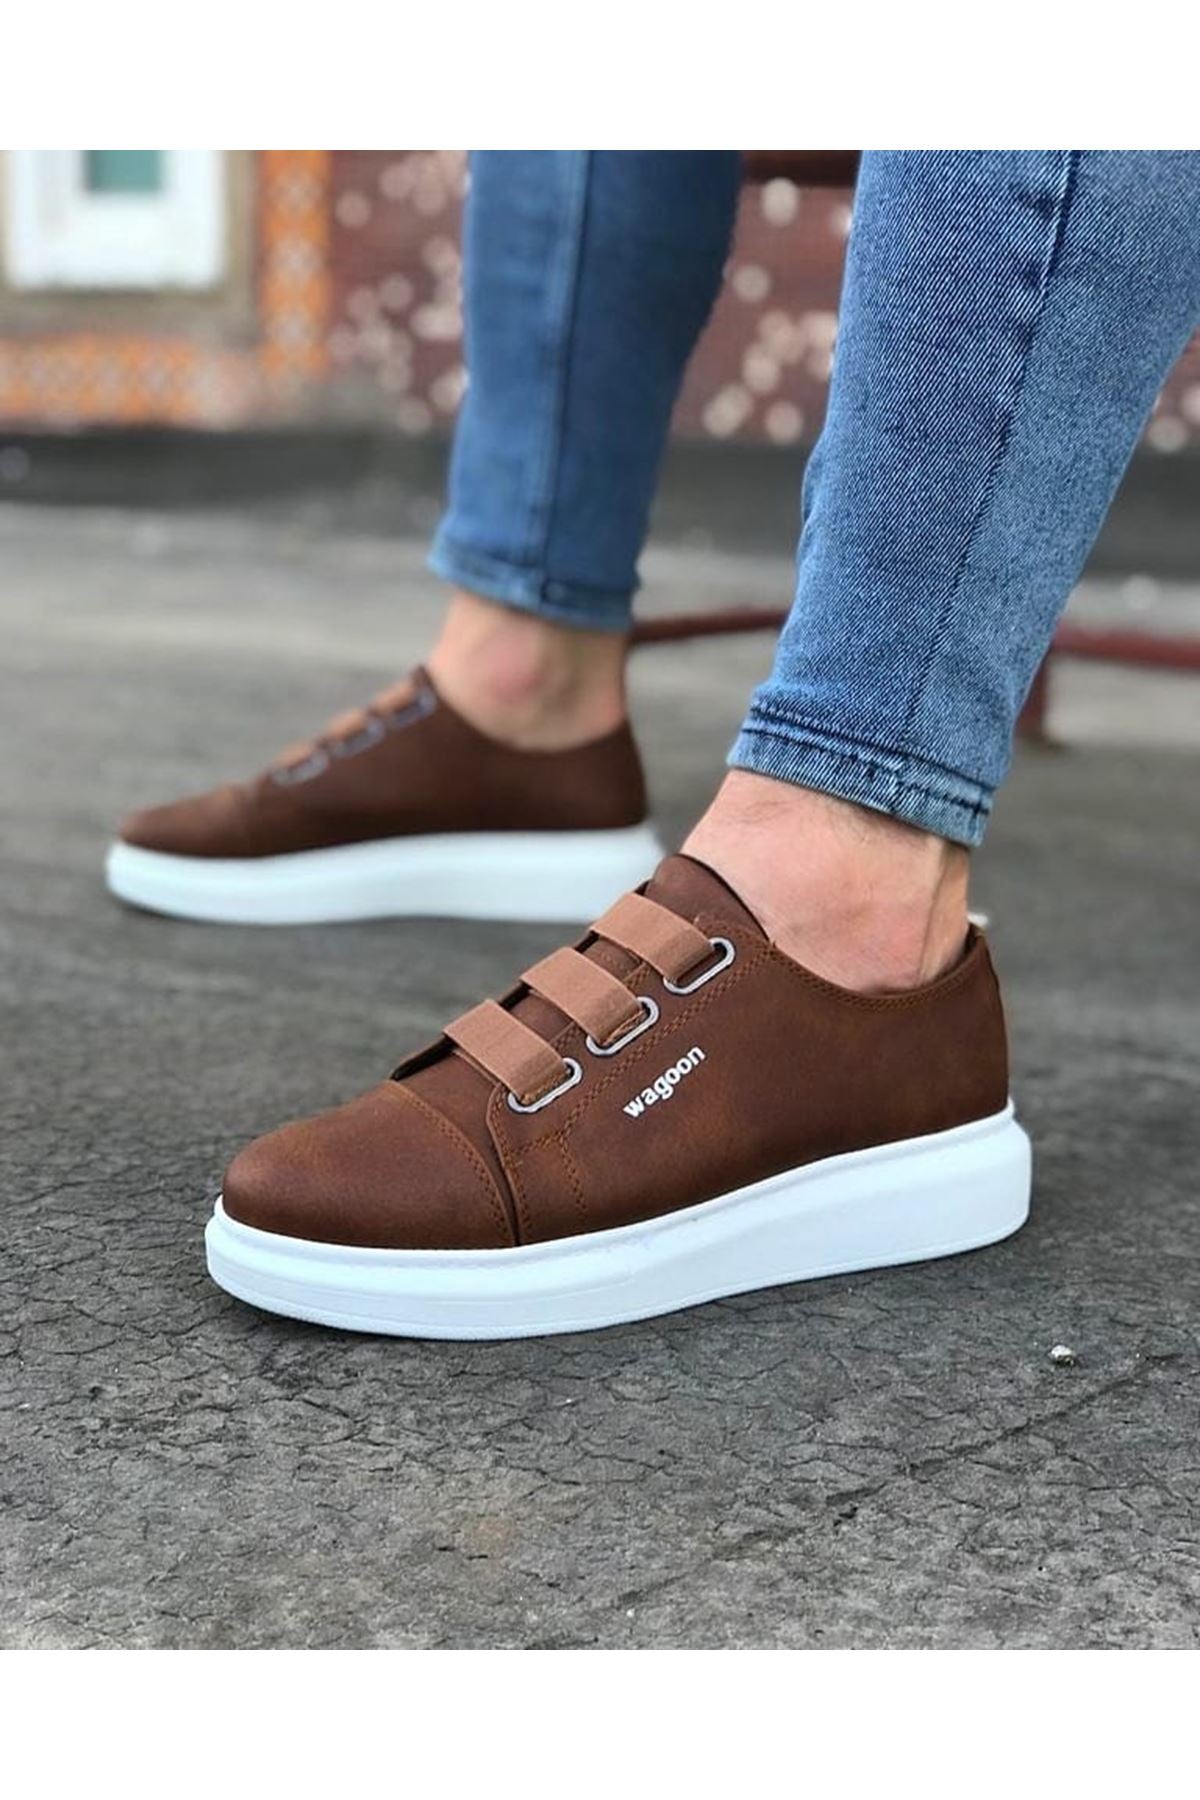 WG026 3 Band Tan Thick Sole Casual Men's Shoes - STREETMODE™